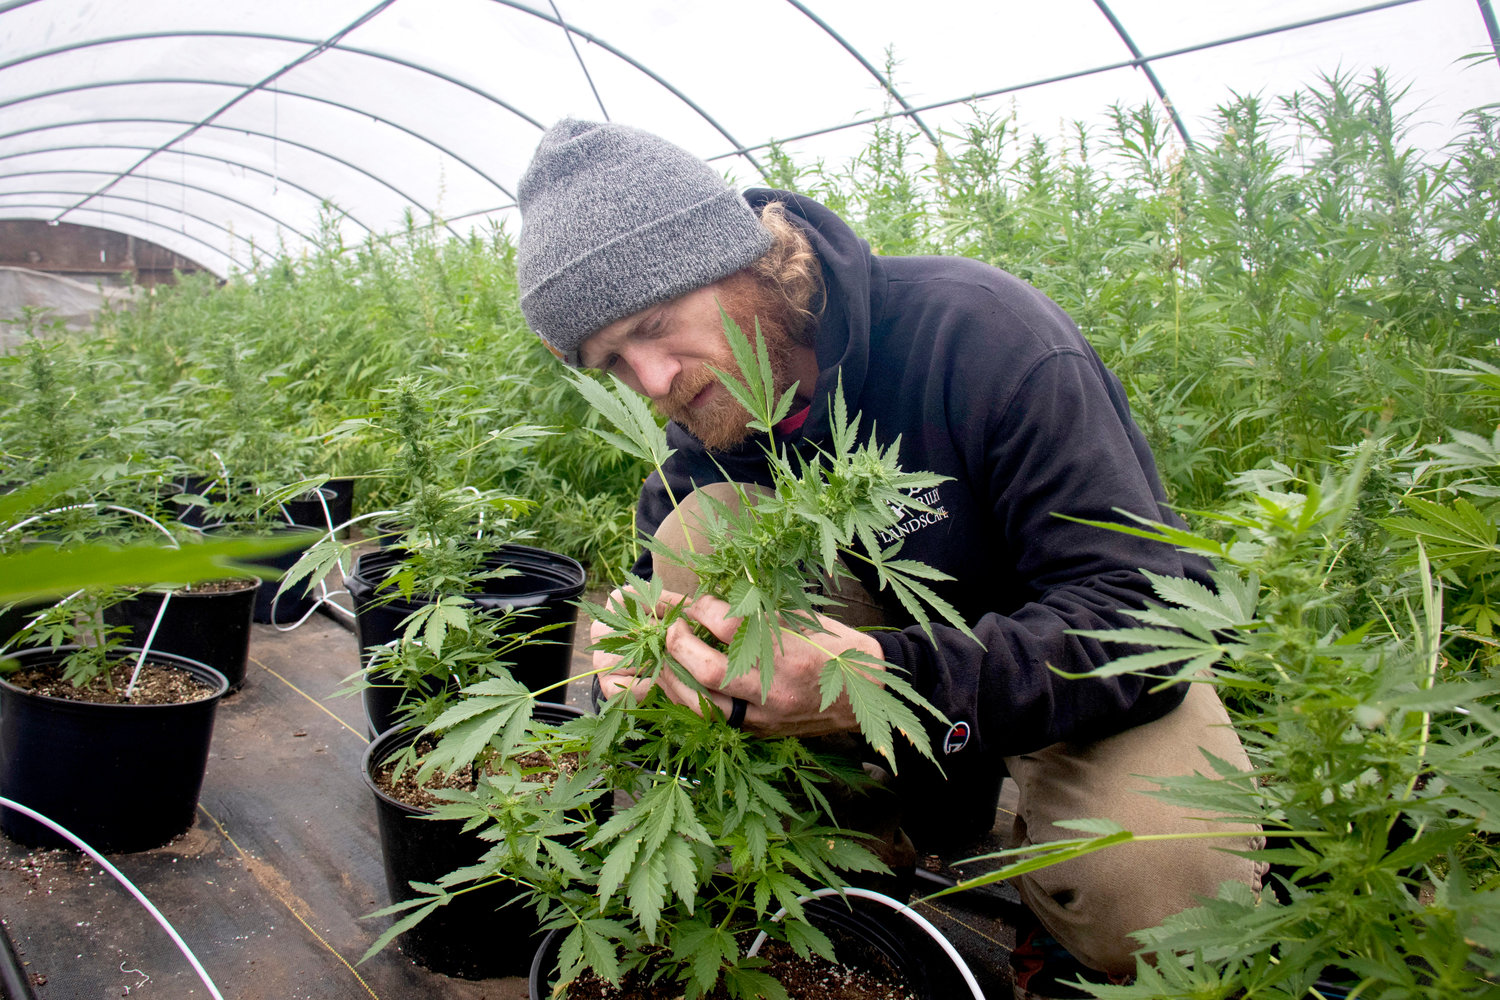 A student examines a hemp plant inside the greenhouse at Muscatine Community College during the growing season.